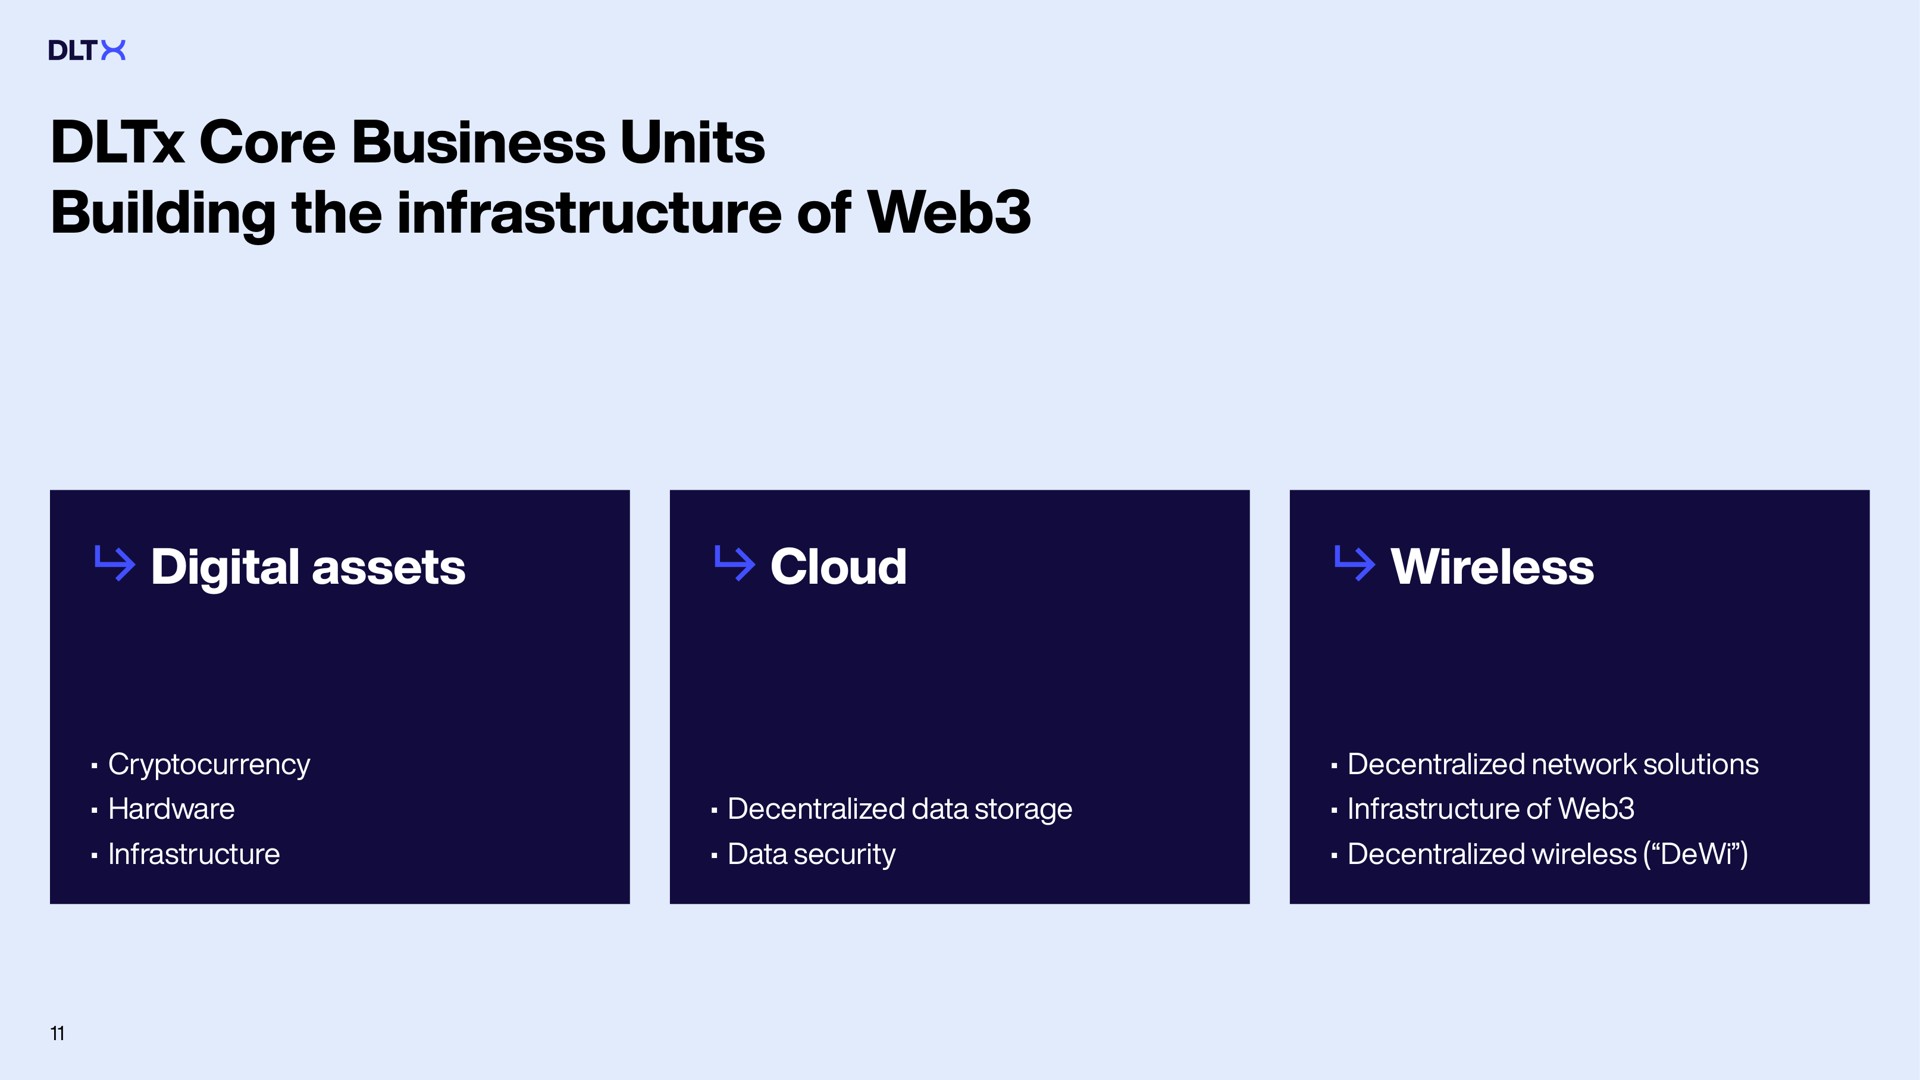 core business units building the infrastructure of web digital assets cloud wireless hardware decentralized data storage data security decentralized decentralized network solutions | DLTx